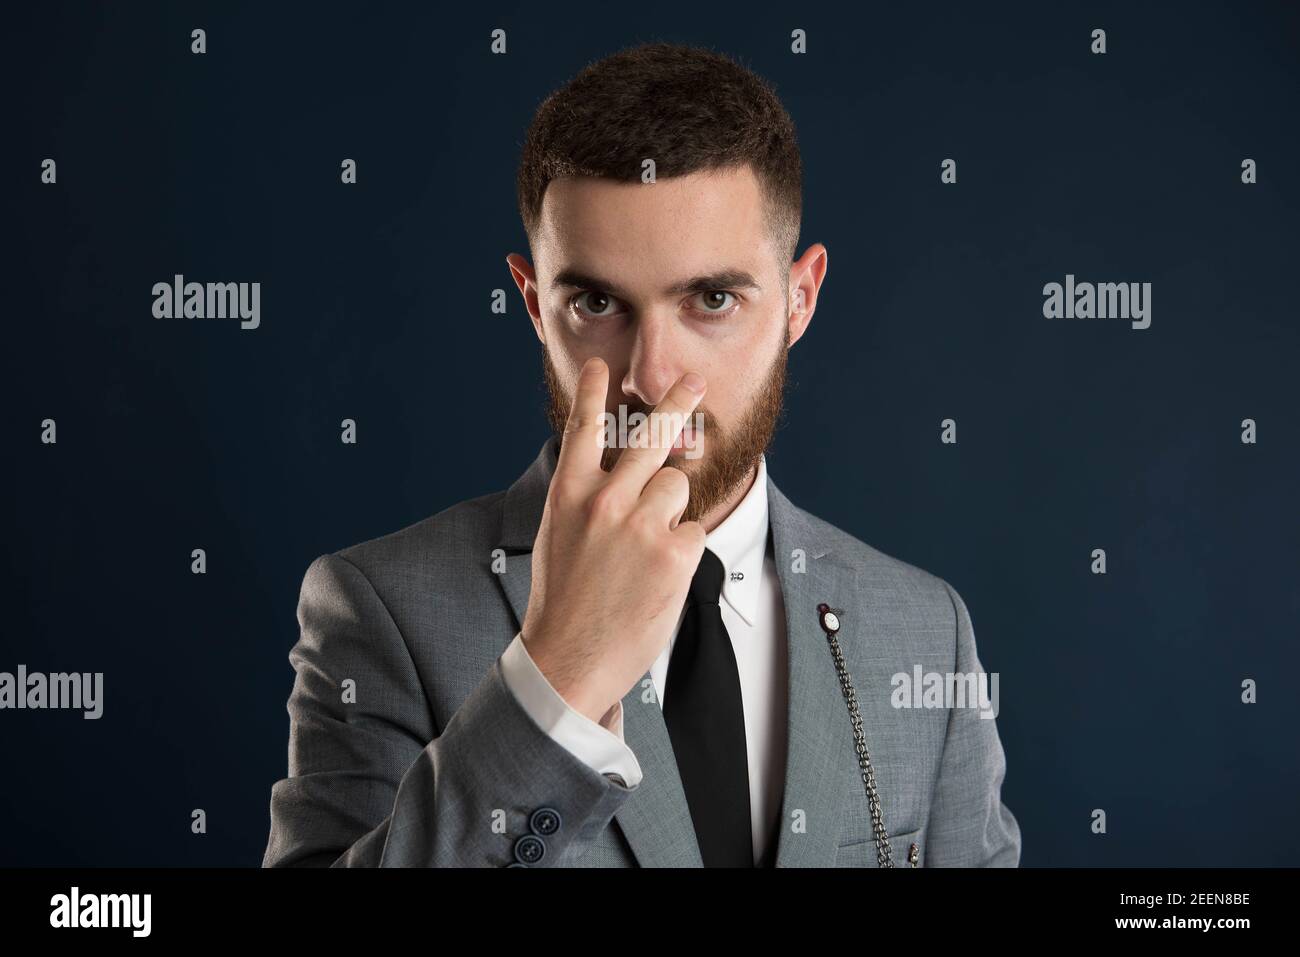 Young entrepreneur saying look intro my eyes wearing a grey suit Stock Photo